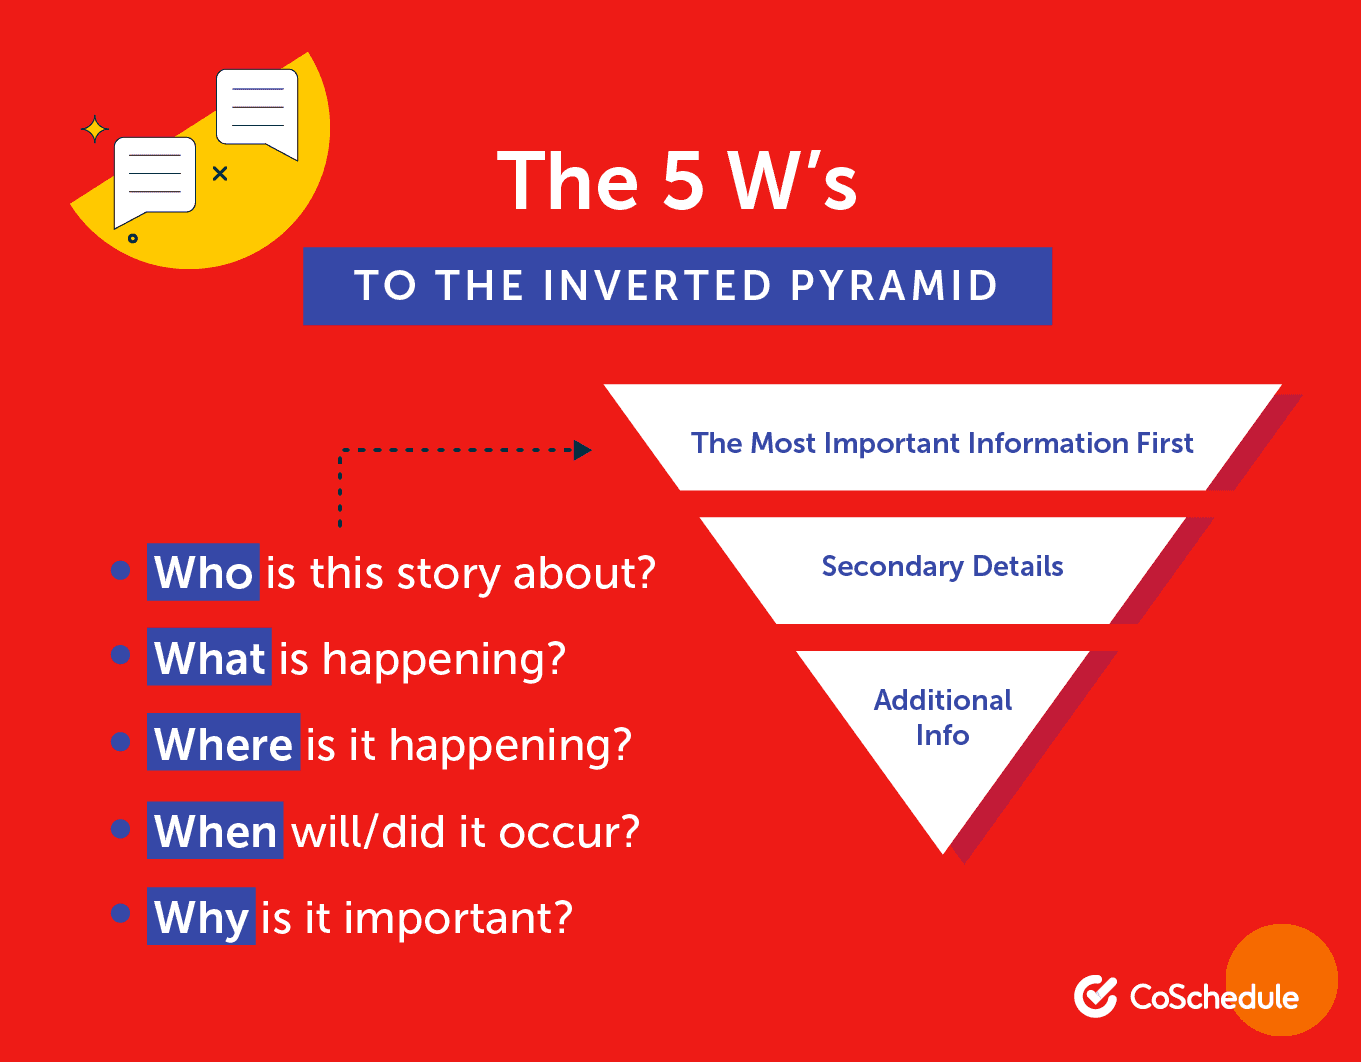 The 5 W's of the inverted pyramid press release.